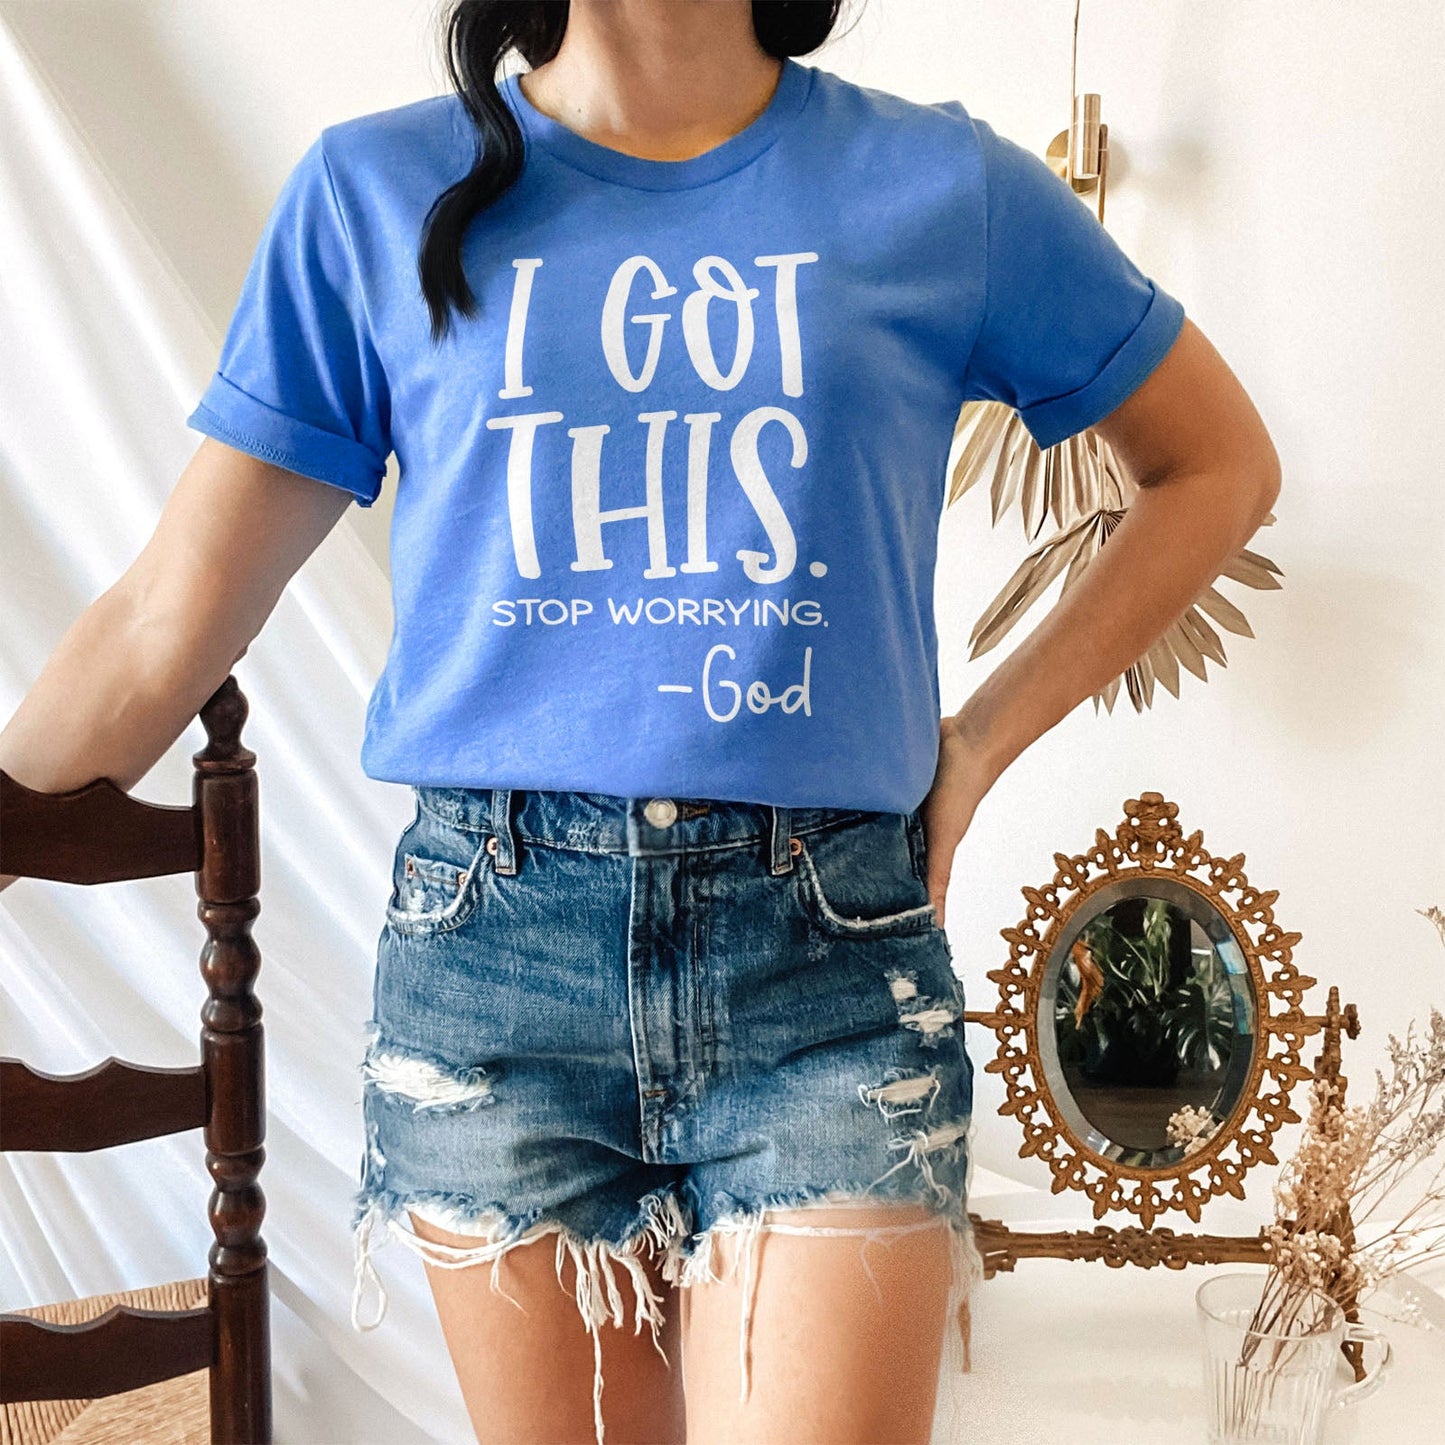 I Got This Stop Worrying Tee Shirts For Women - Christian Shirts for Women - Religious Tee Shirts